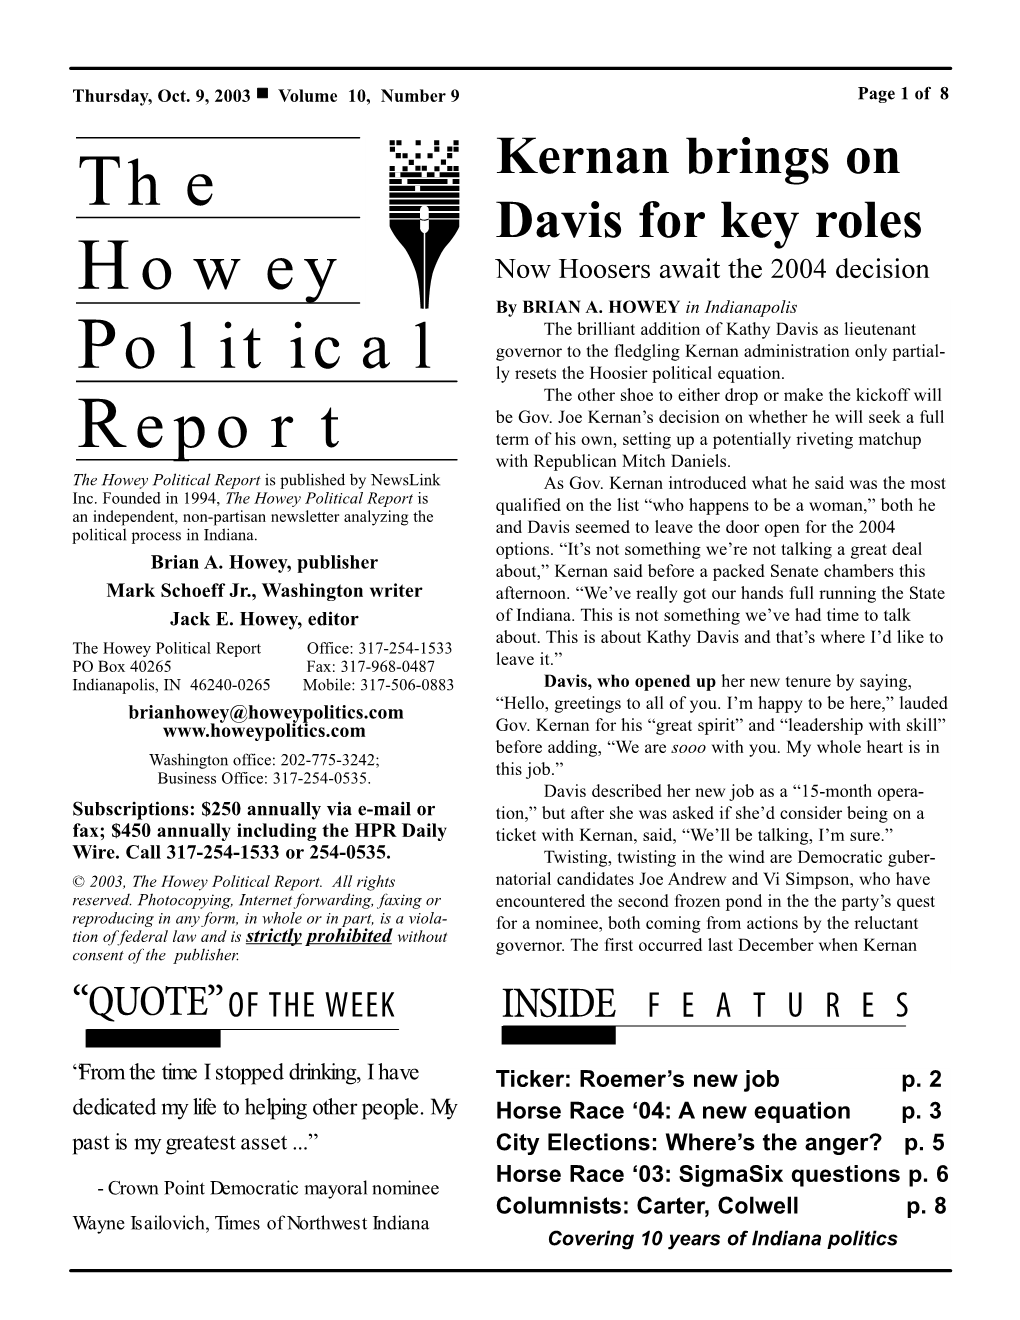 The Howey Political Report Is Published by Newslink As Gov